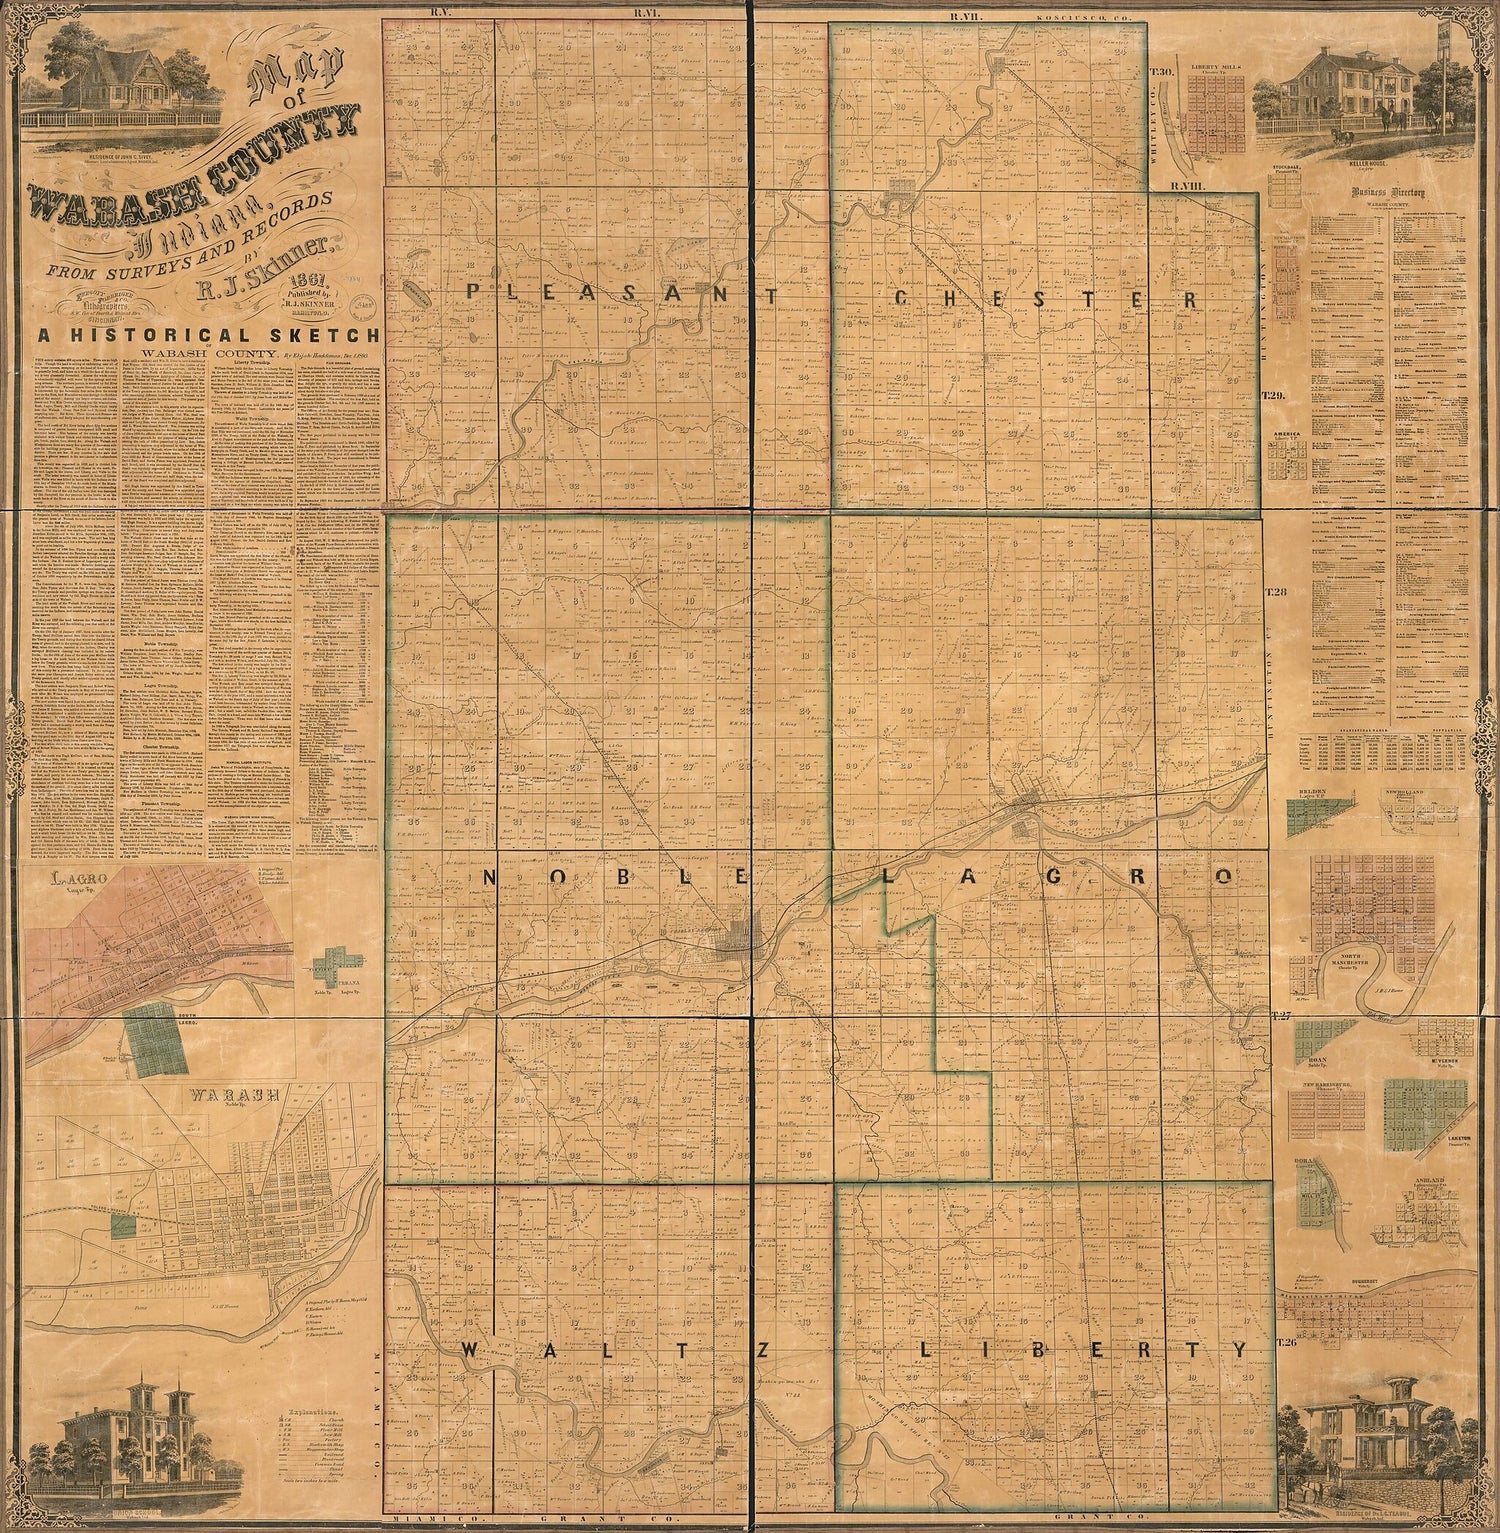 This old map of Map of Wabash County, Indiana from 1861 was created by Forbriger &amp; Co Ehrgott, Robert J. Skinner in 1861